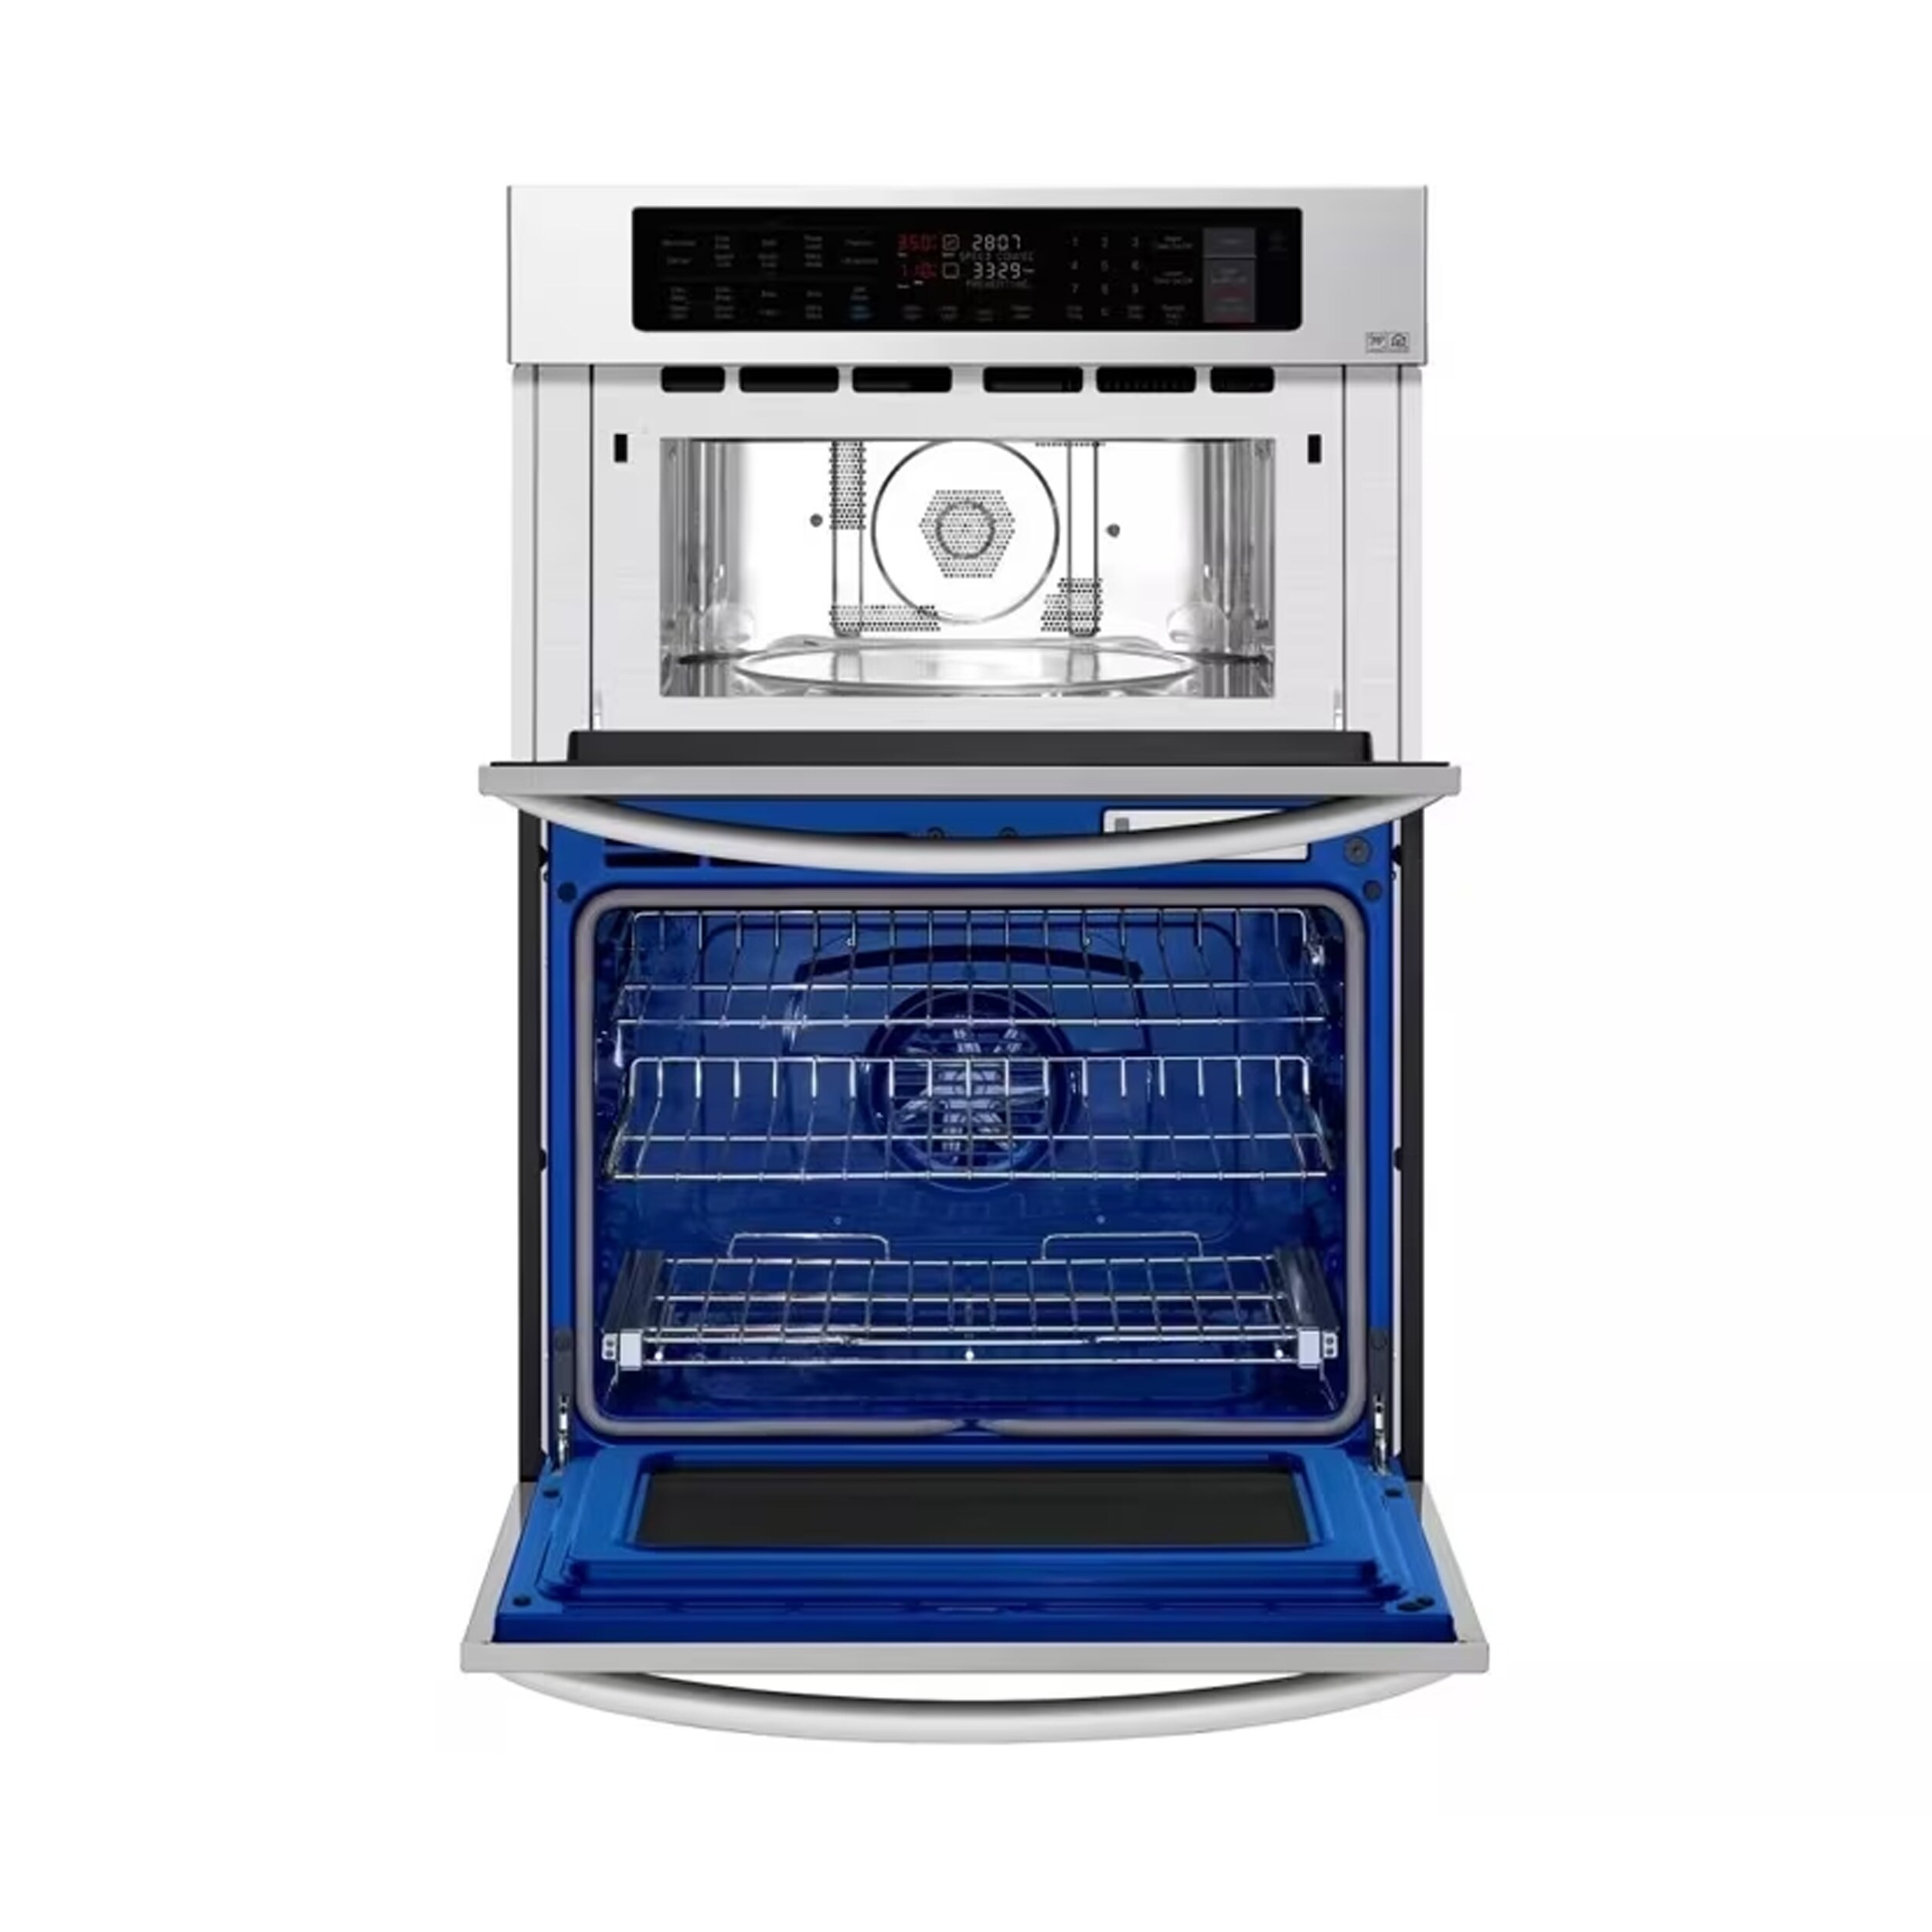 LG 1.7 4.7 CU. FT. SMART WI-FI ENABLED COMBINATION DOUBLE WALL OVEN